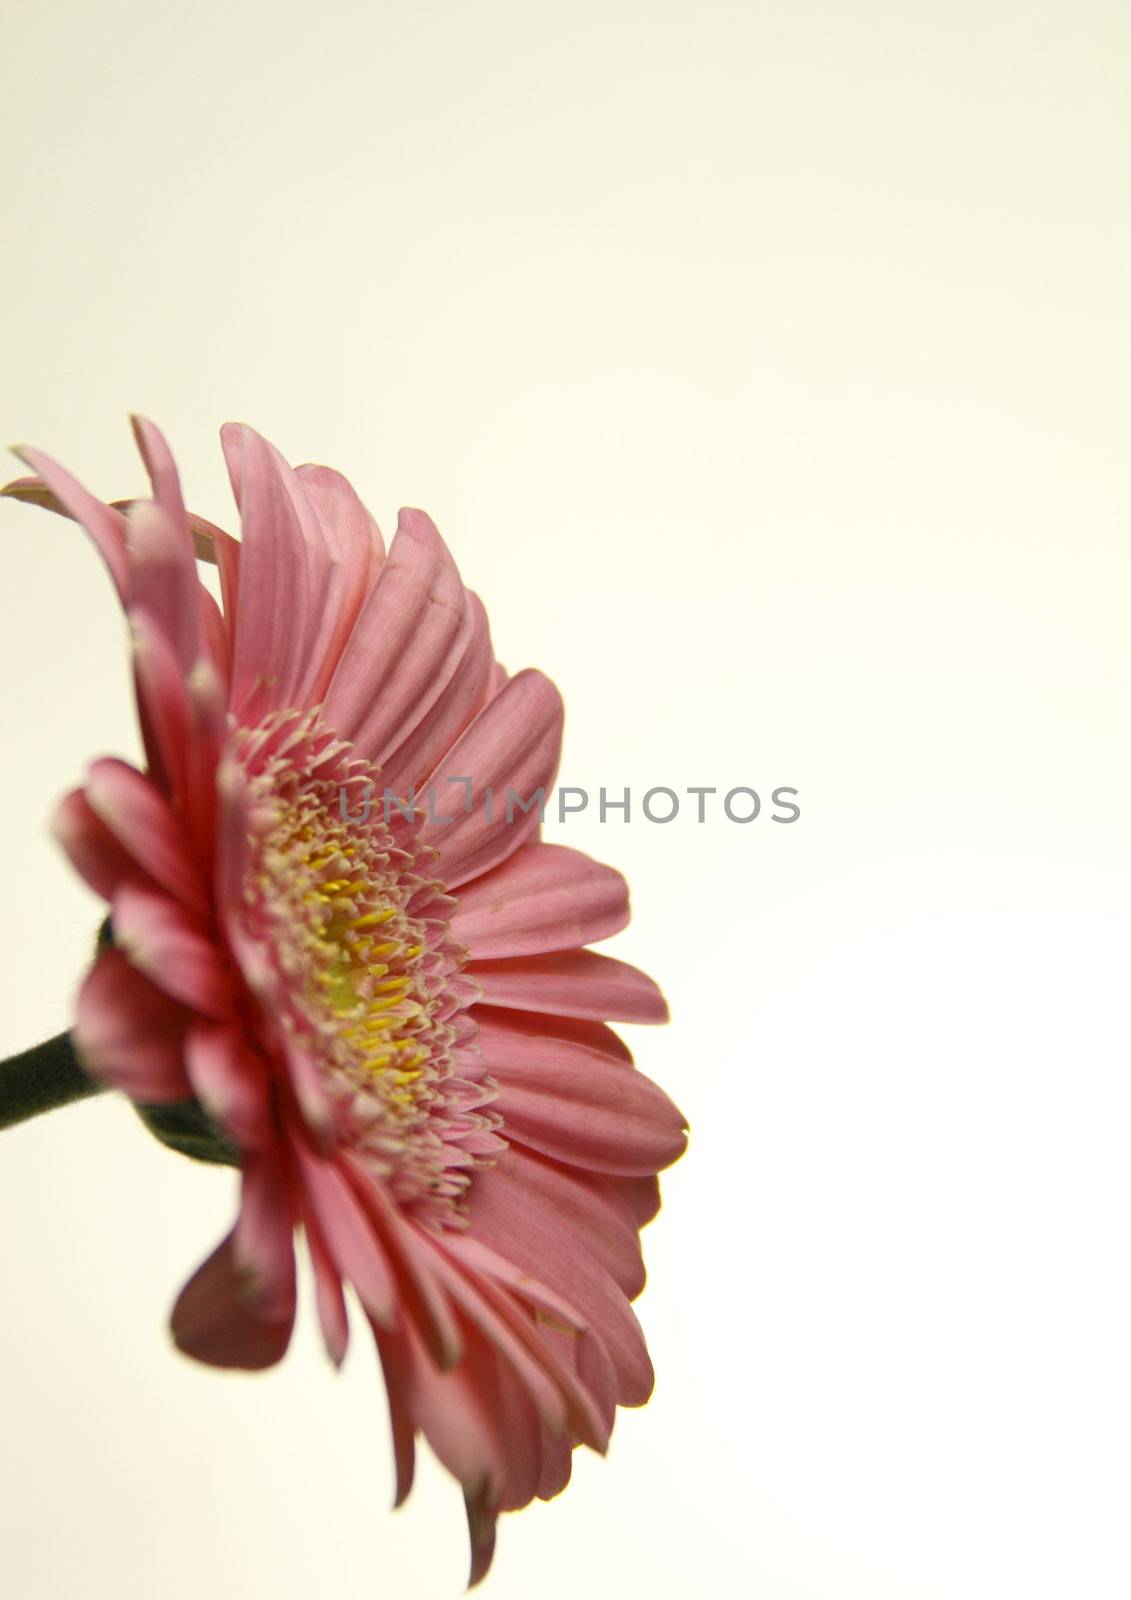 this delicate pink zinnia over a light background